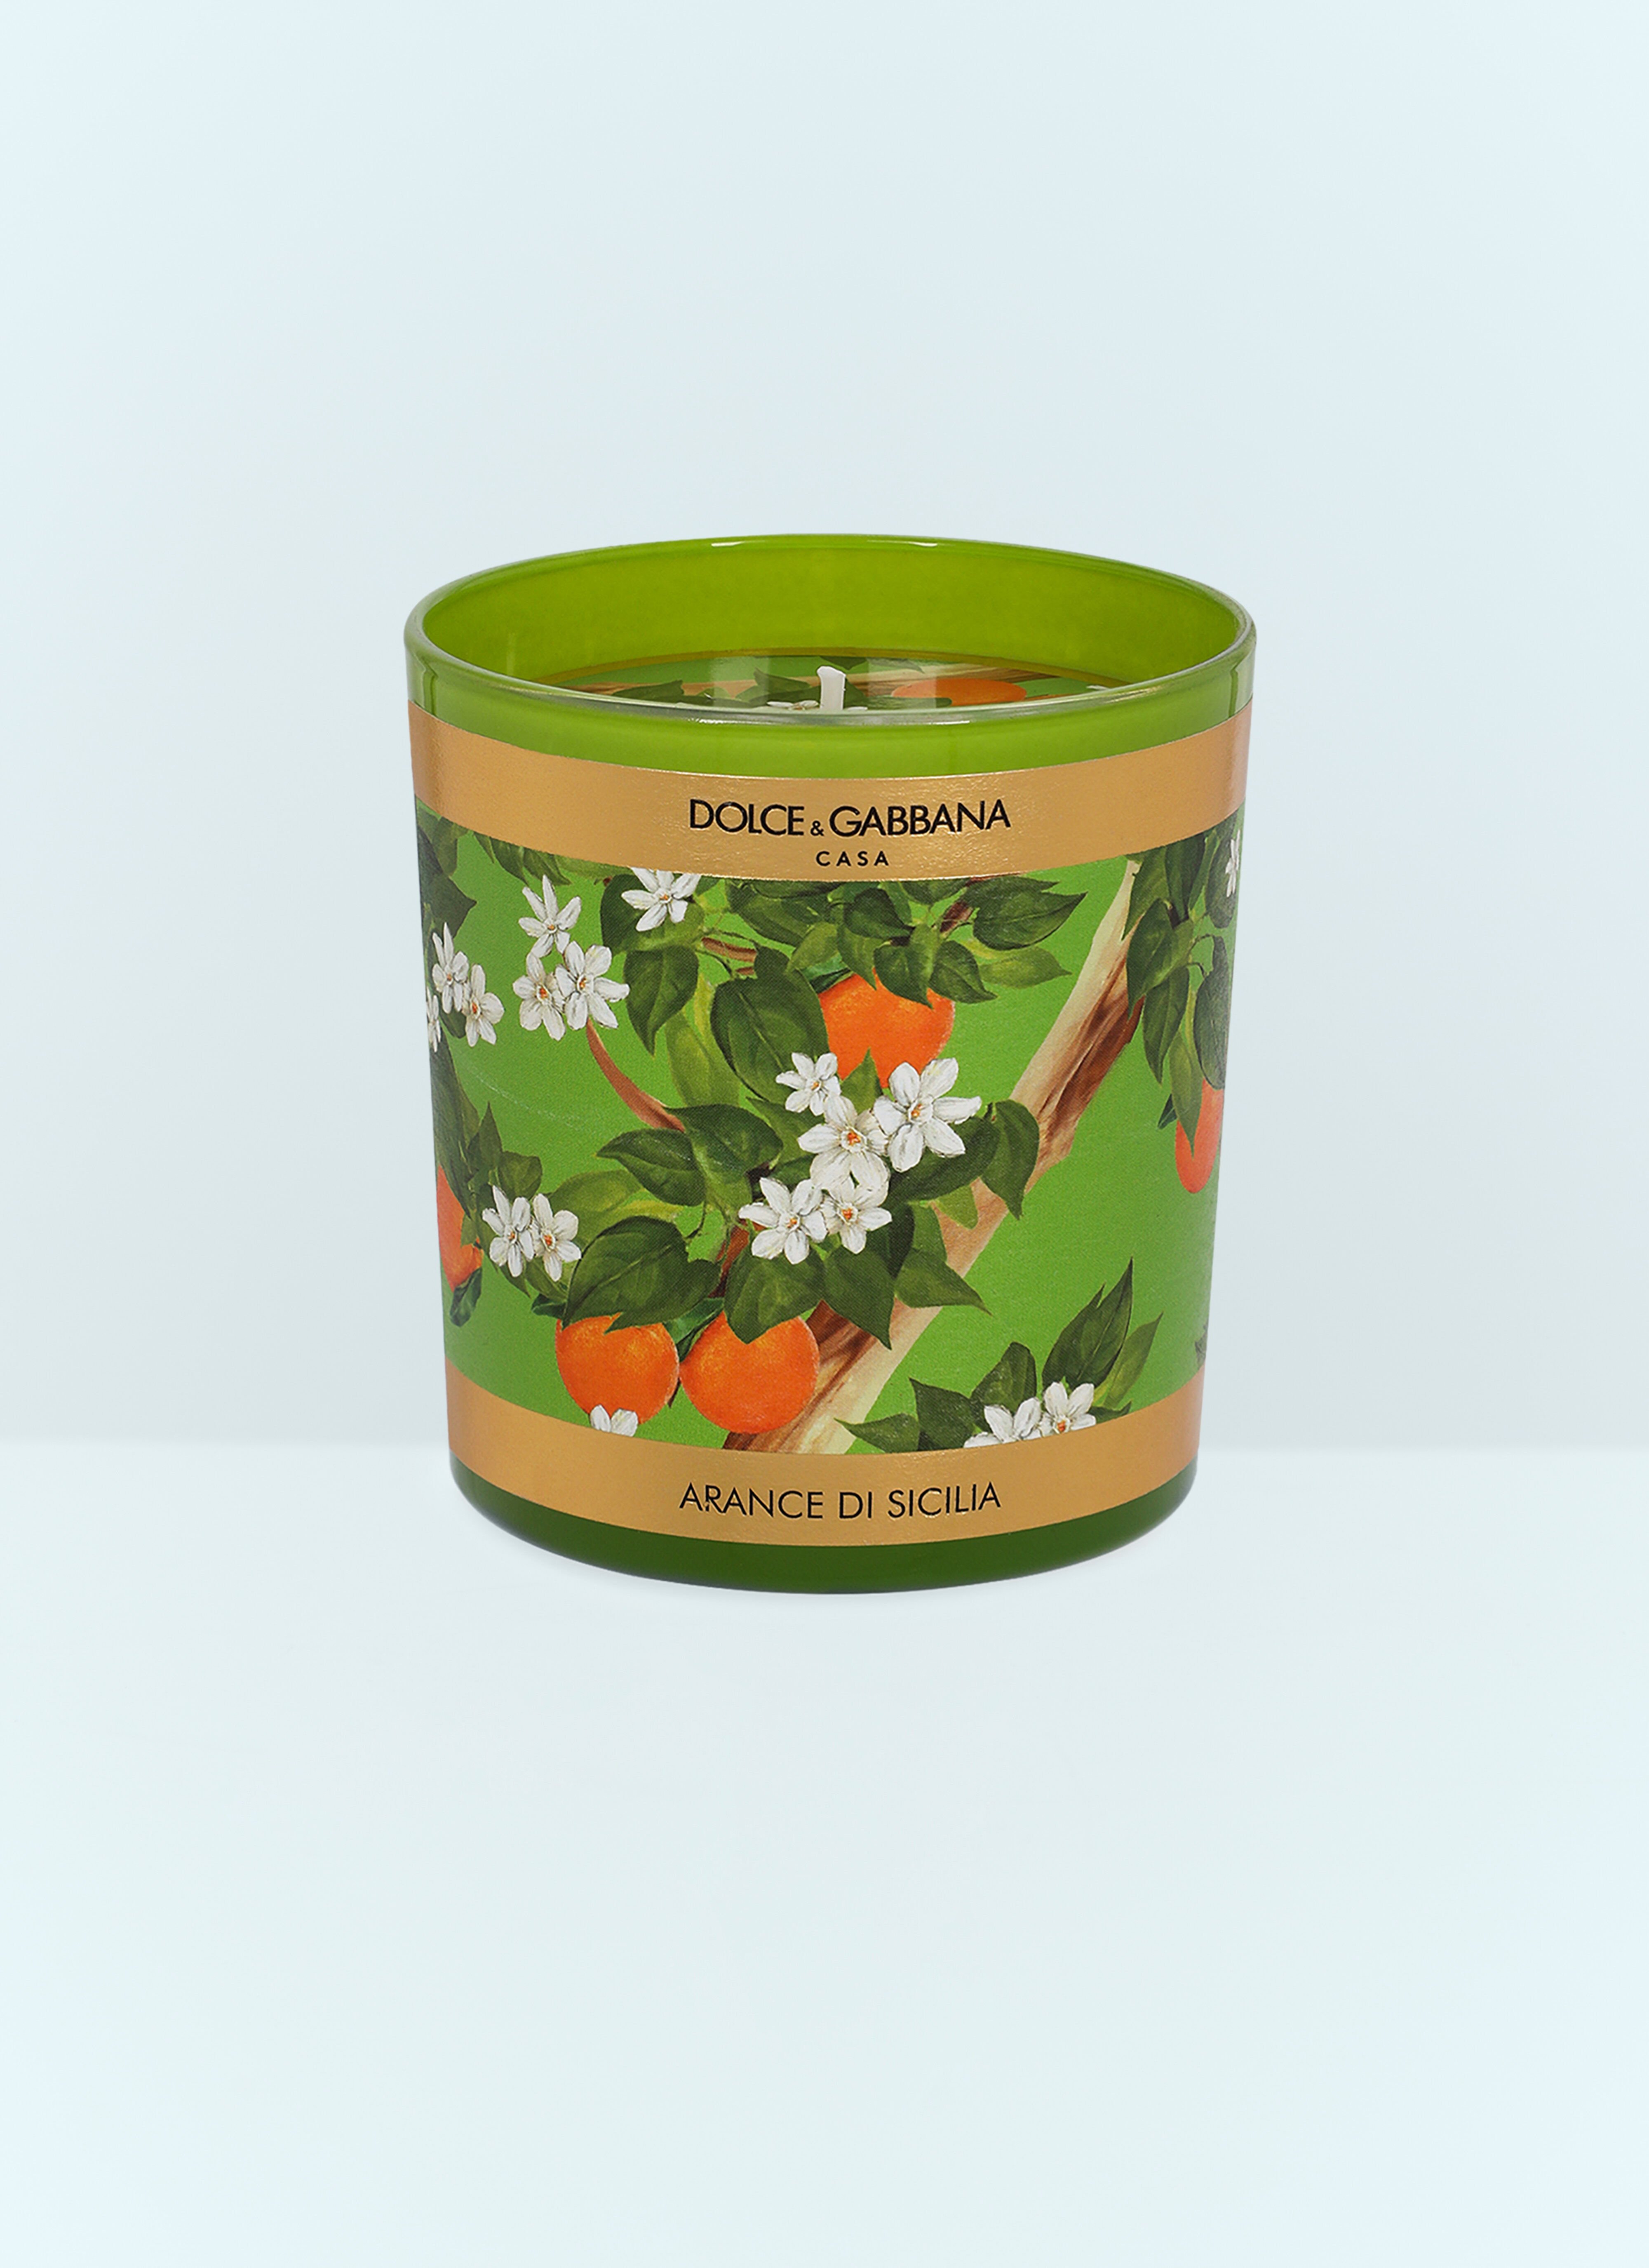 Les Ottomans Sicilian Orange Scented Candle Green wps0691232